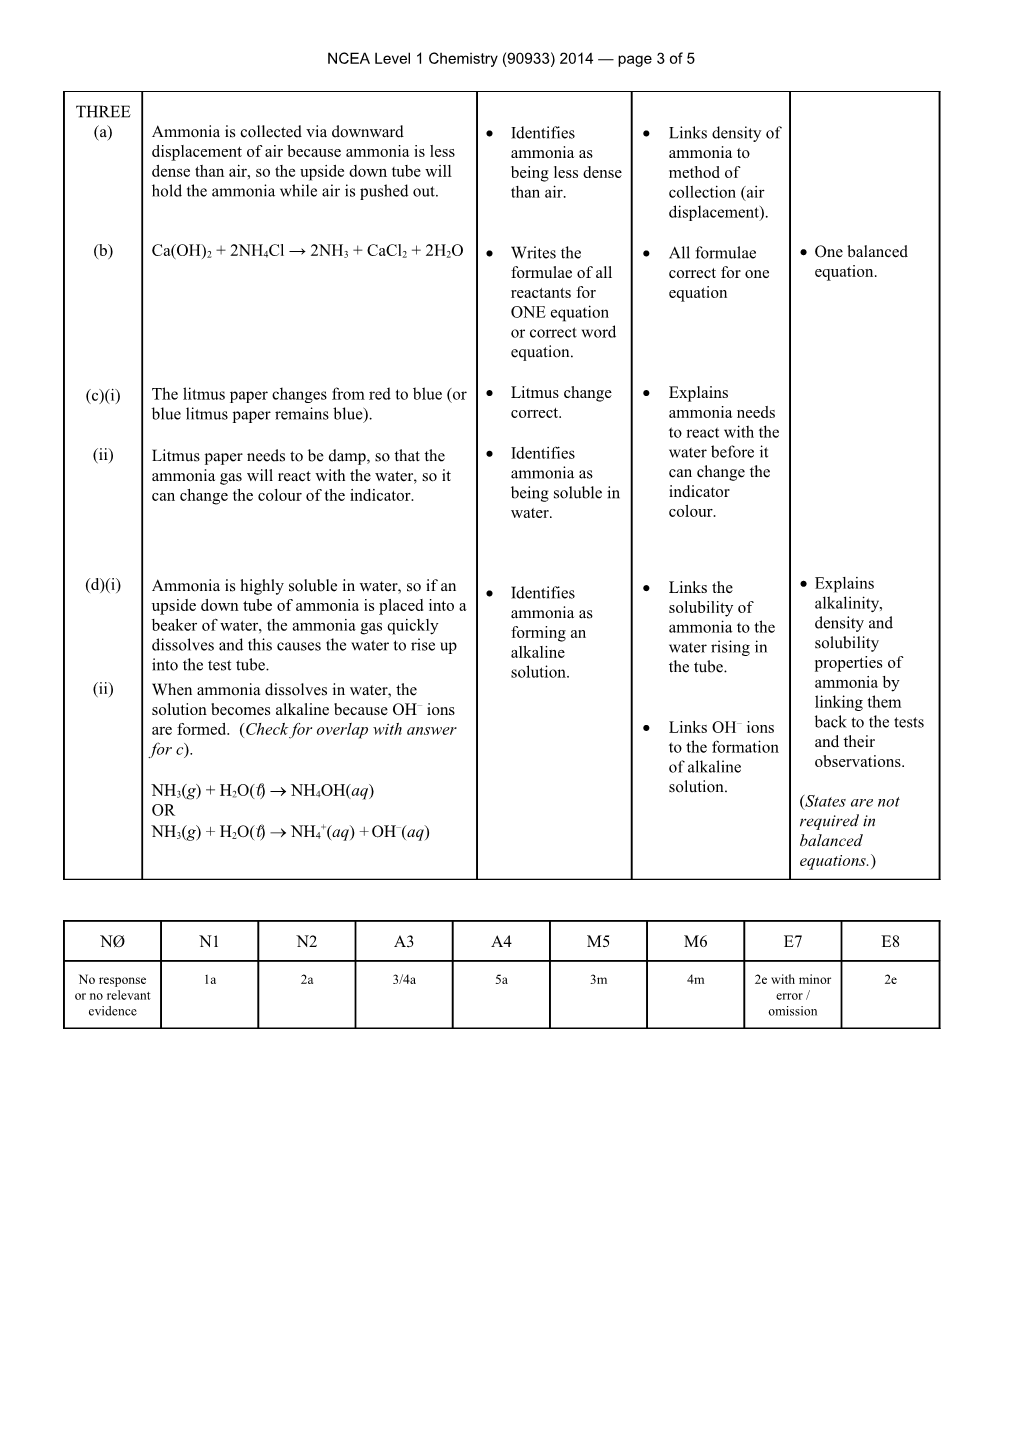 NCEA Level 1 Chemistry (90933) 2014 Assessment Schedule